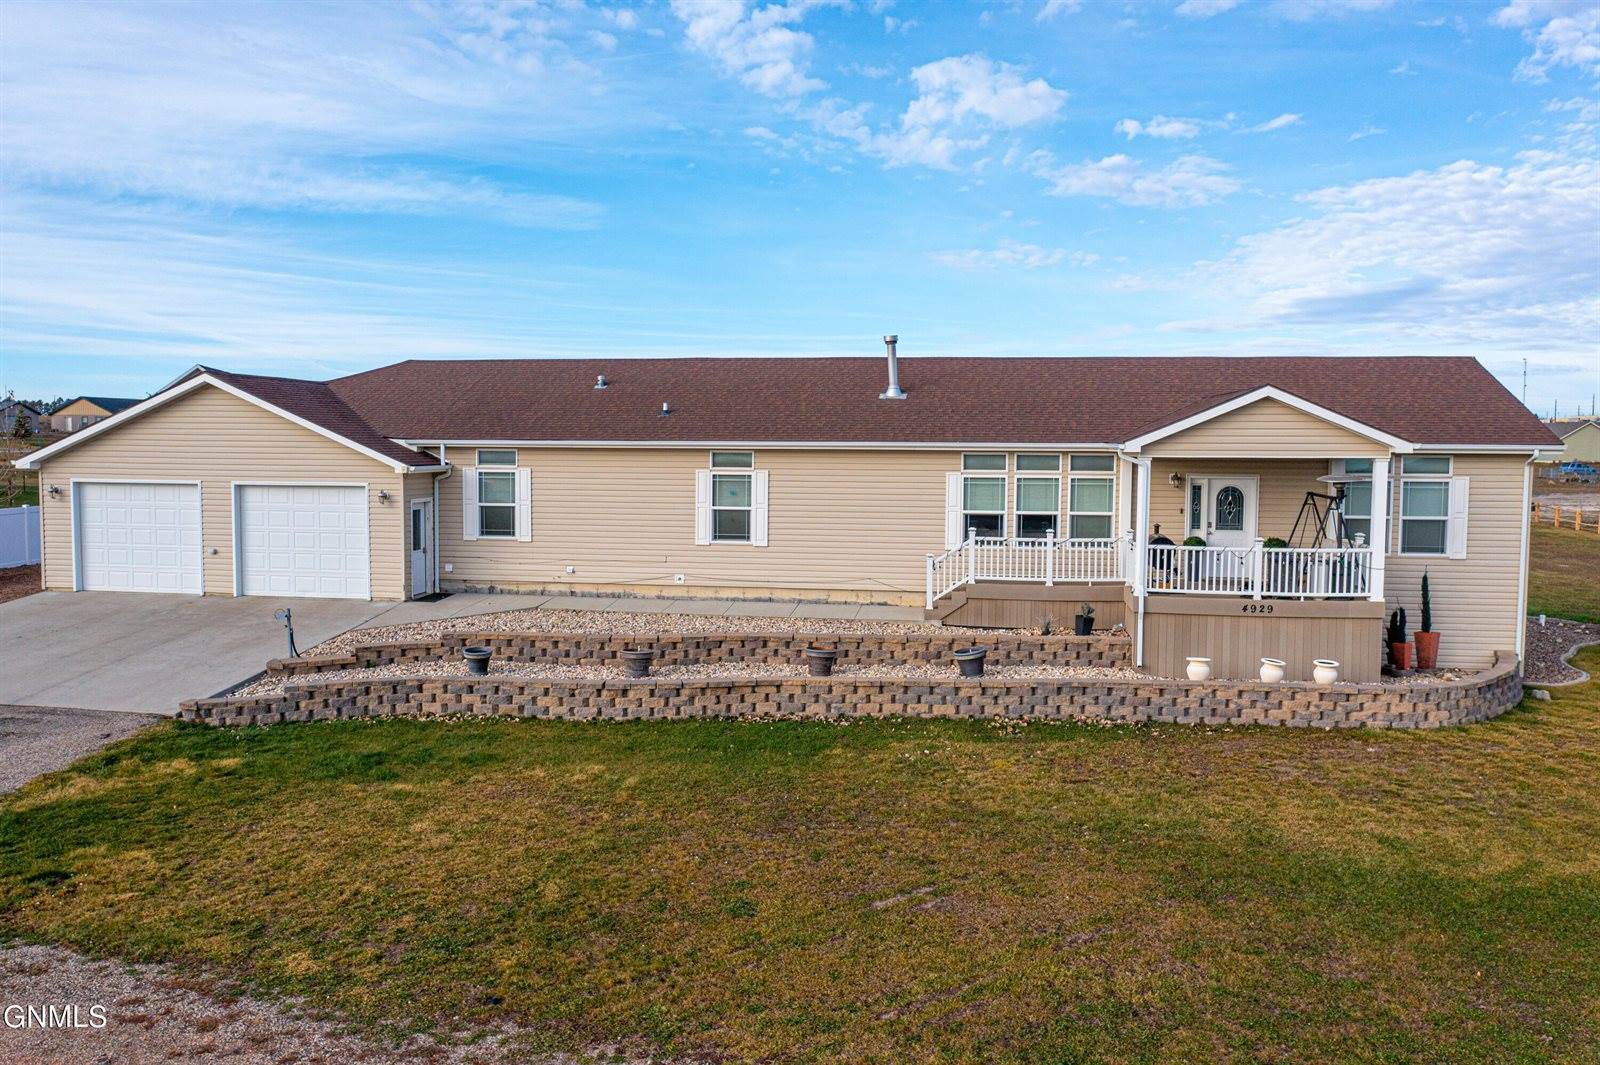 4929 140th Ave Nw, Williston, ND 58801